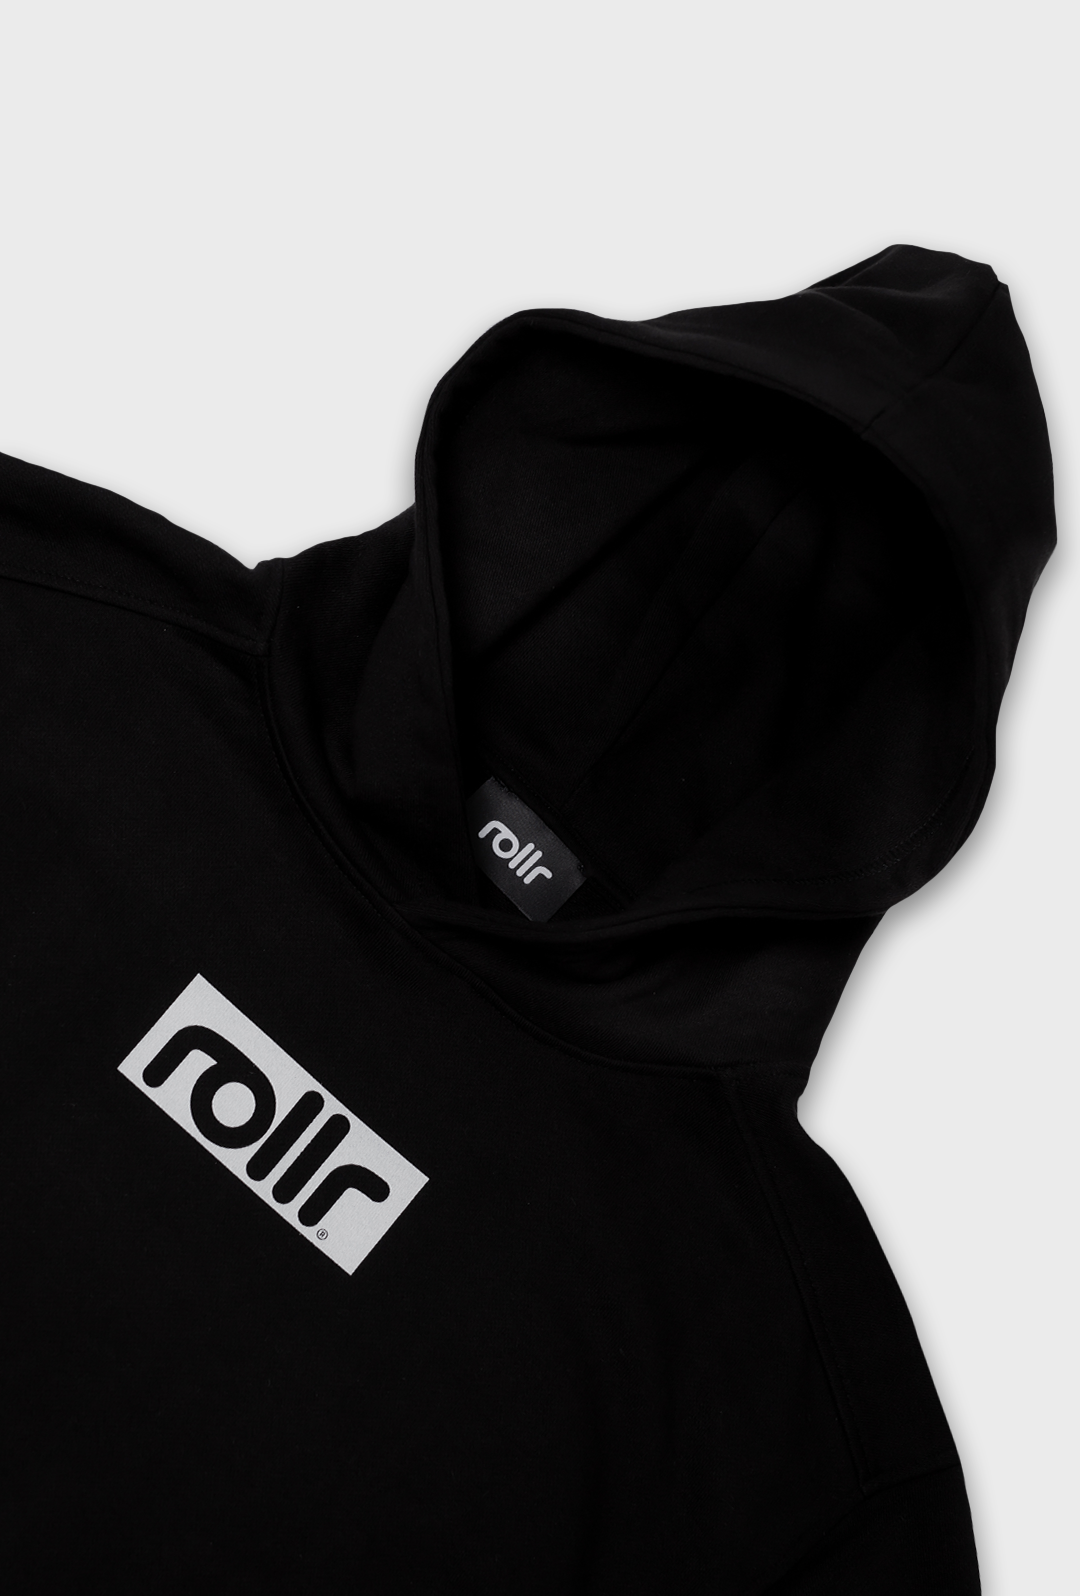 rollr clothing cropped womens midnight black hoodie style that moves tagline and roller print logo and box fit hood